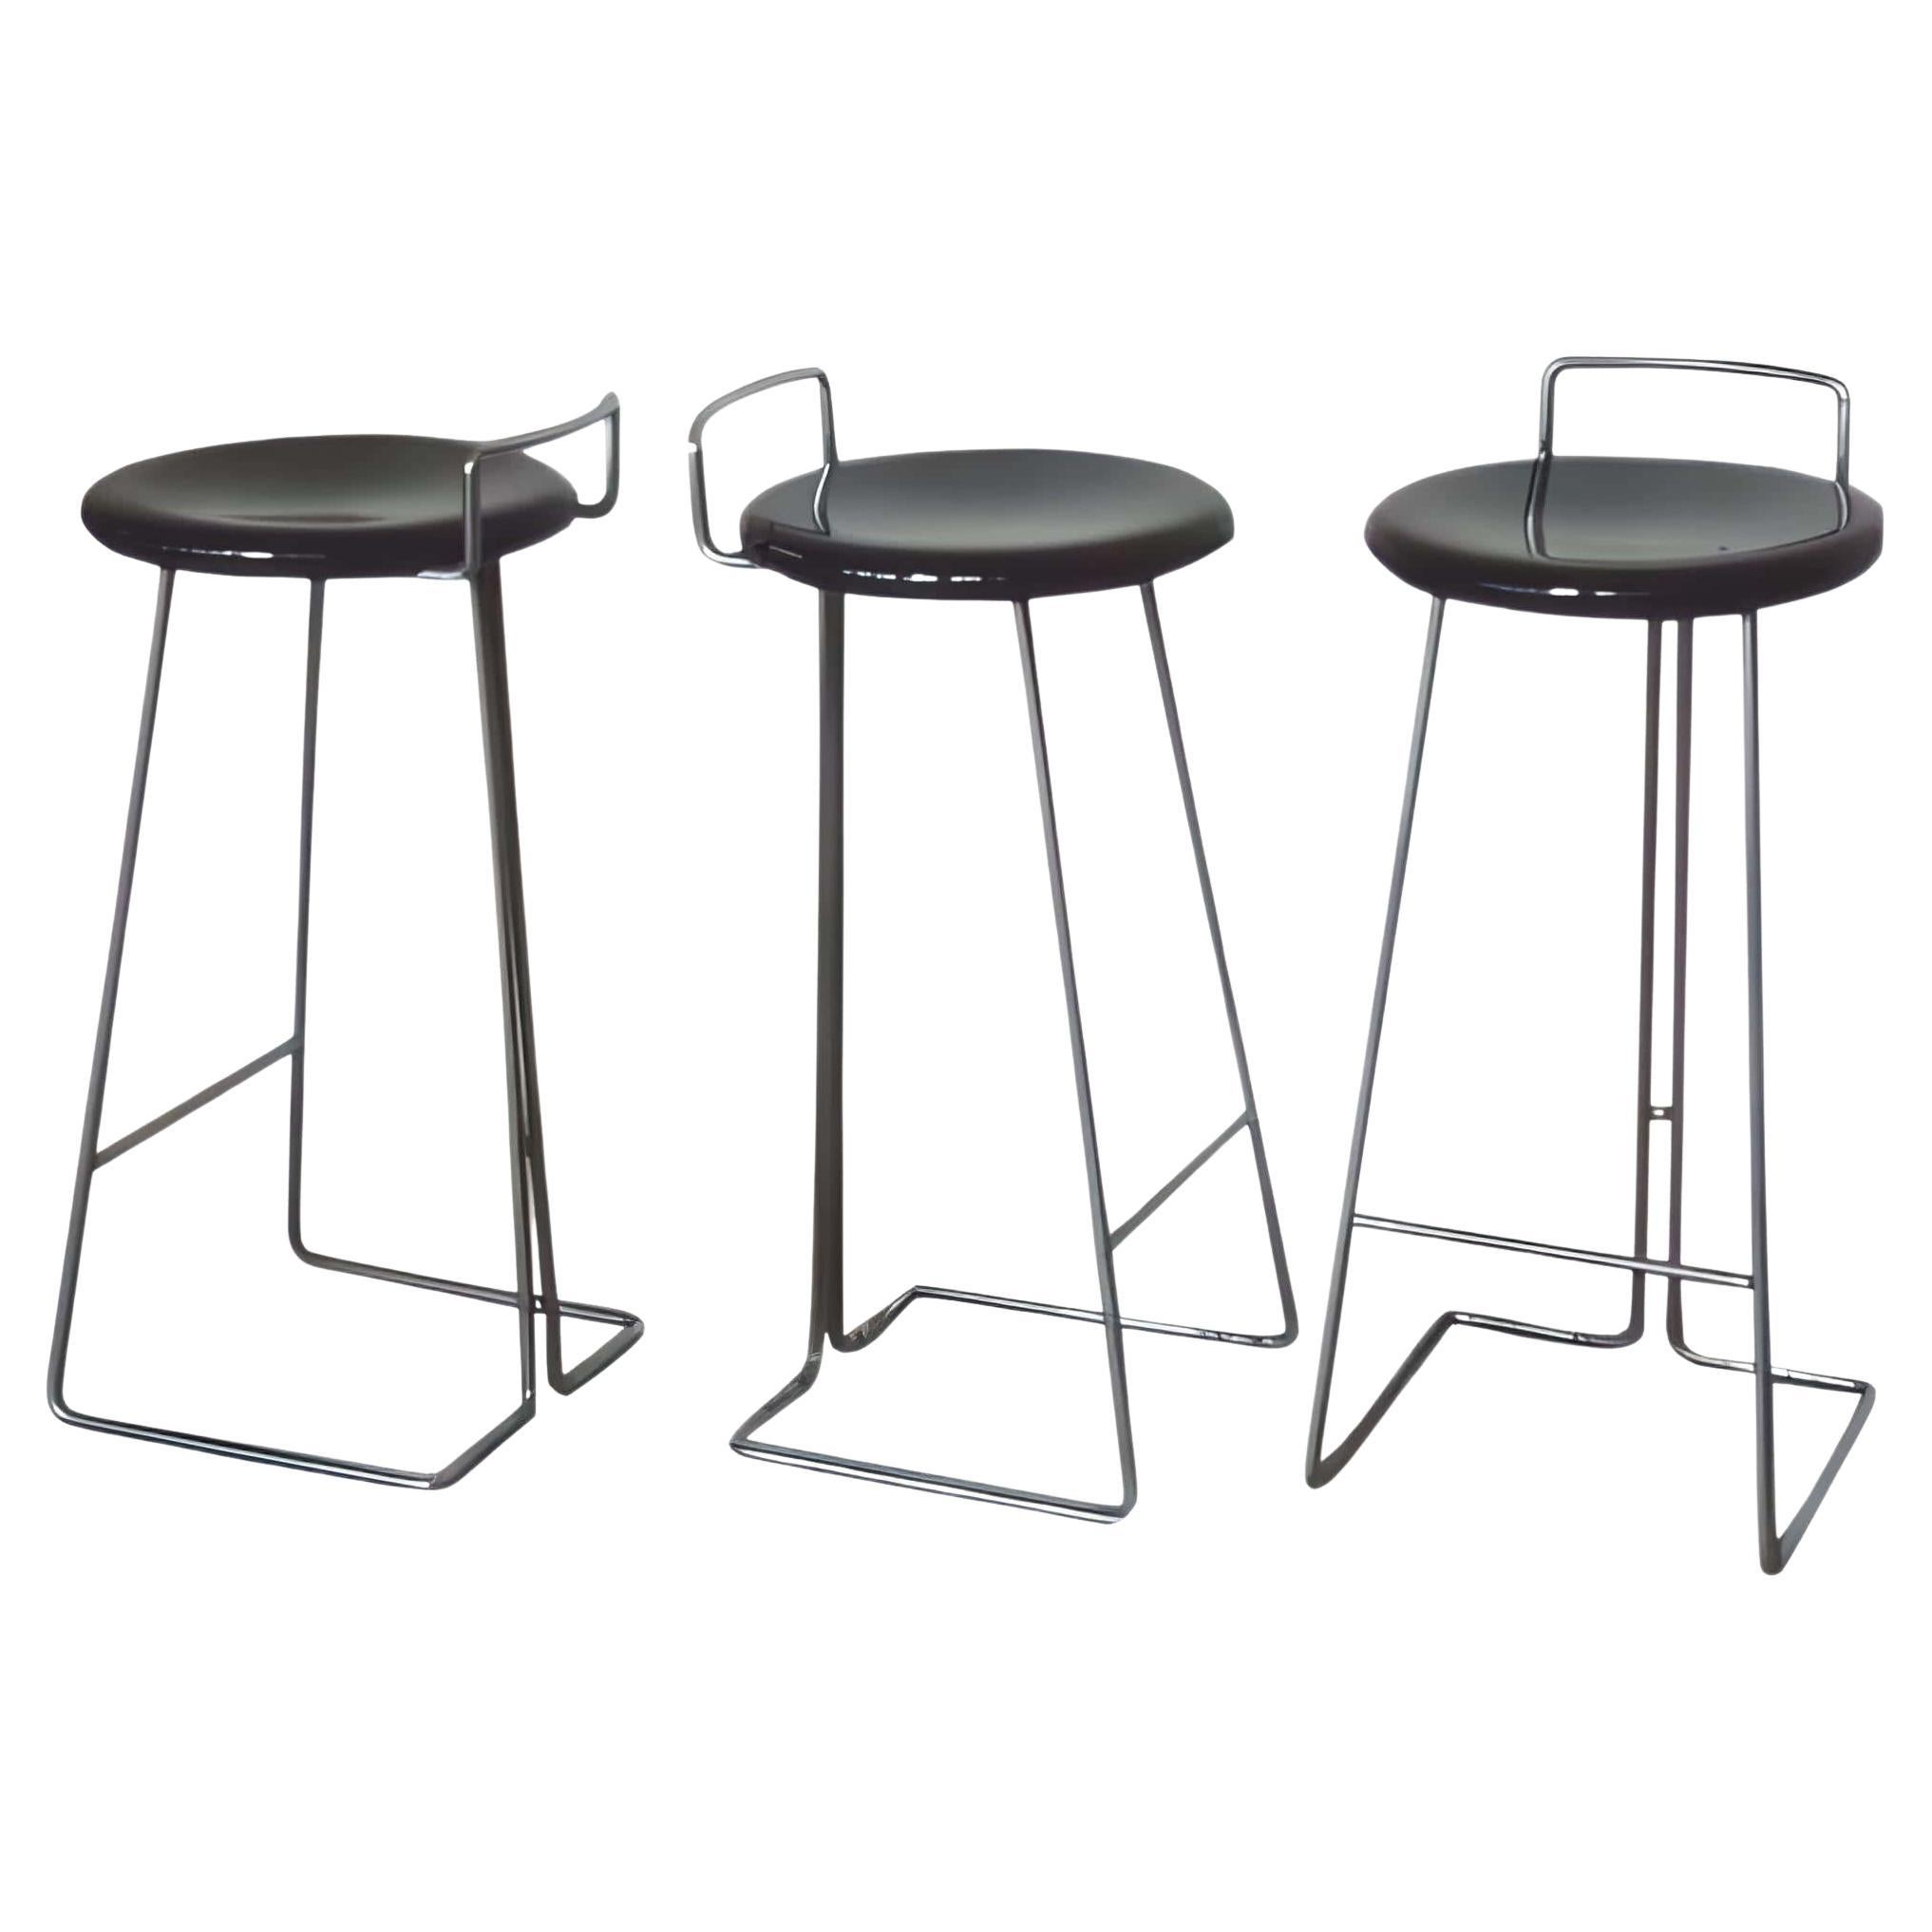 Set of 3 Vintage Stools by Coslin George for Dada, Italy 1970s